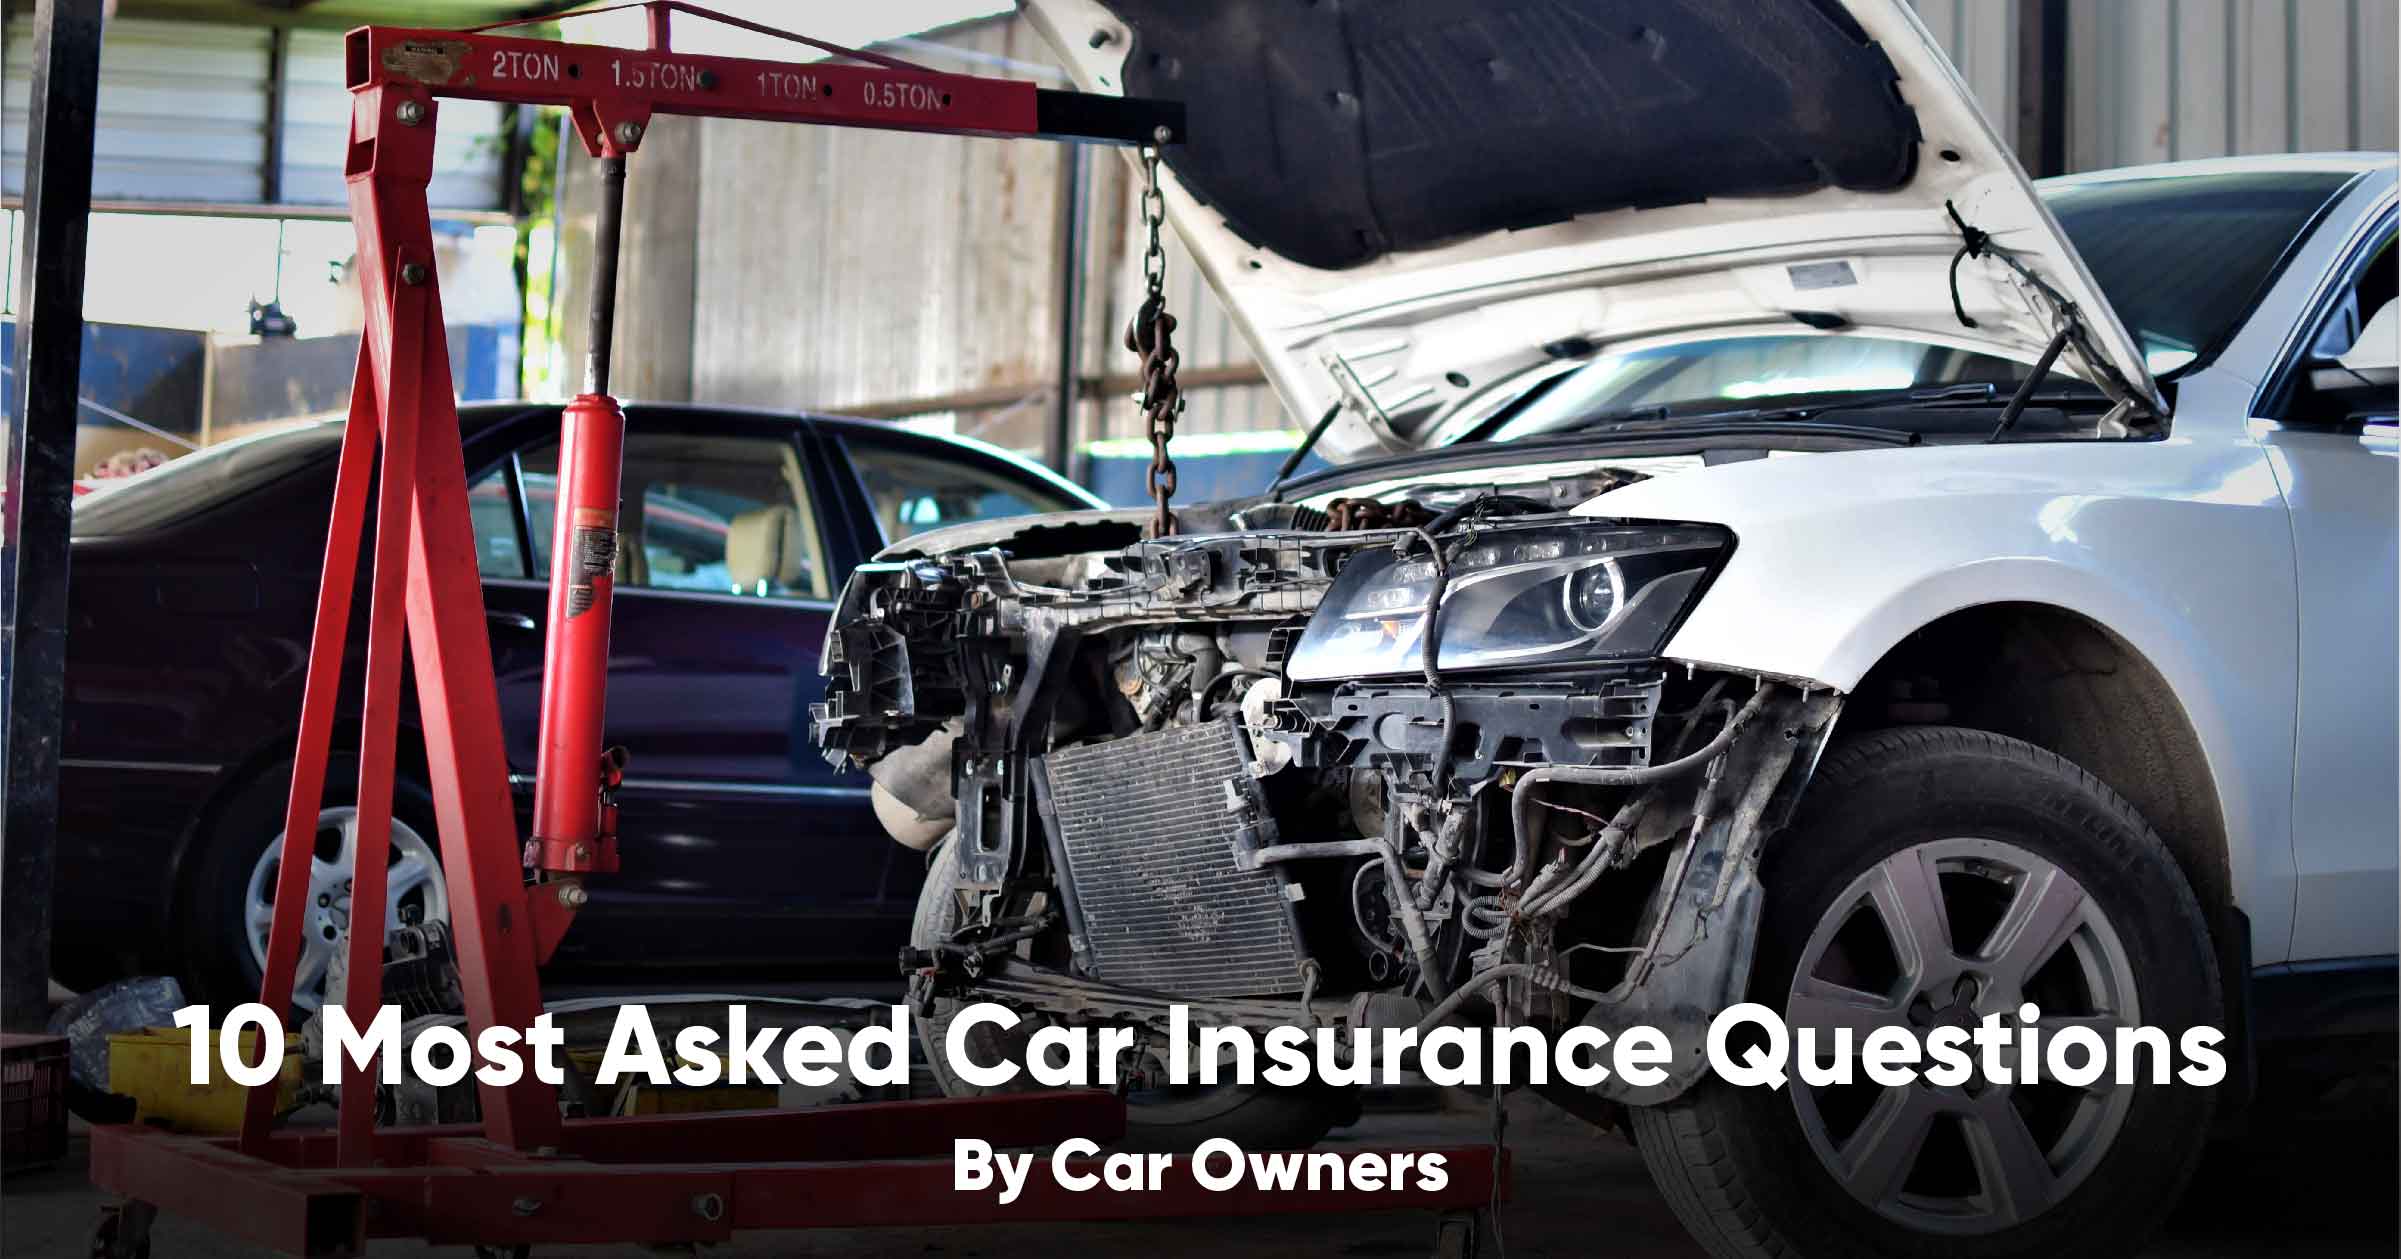 10 most asked car insurance questions